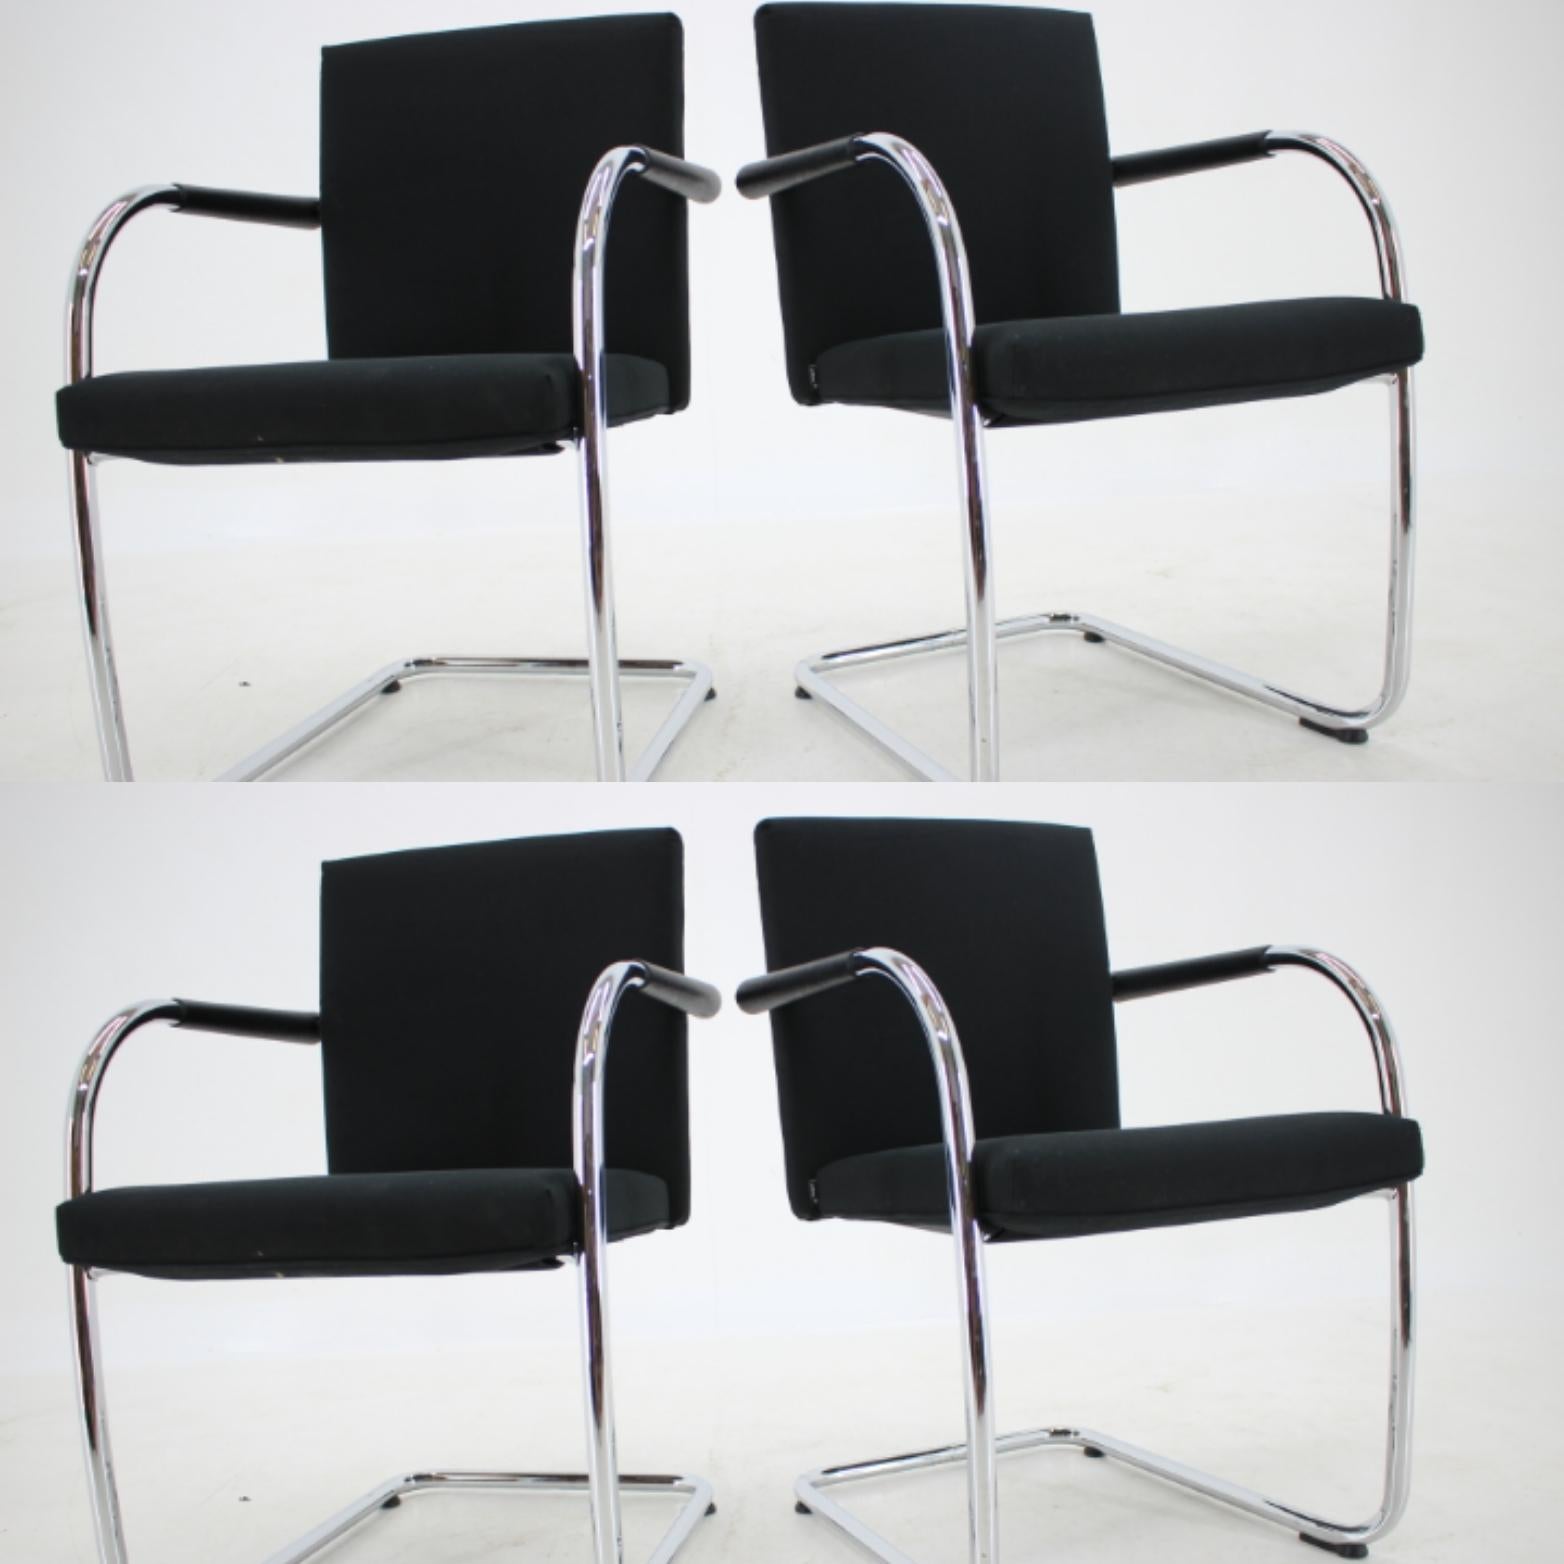 - Model Visasoft
- Marked
- Very practical and comfortable chair
- In style of Barcelona chair / Mies van der Rohe
- Also as dining chair.